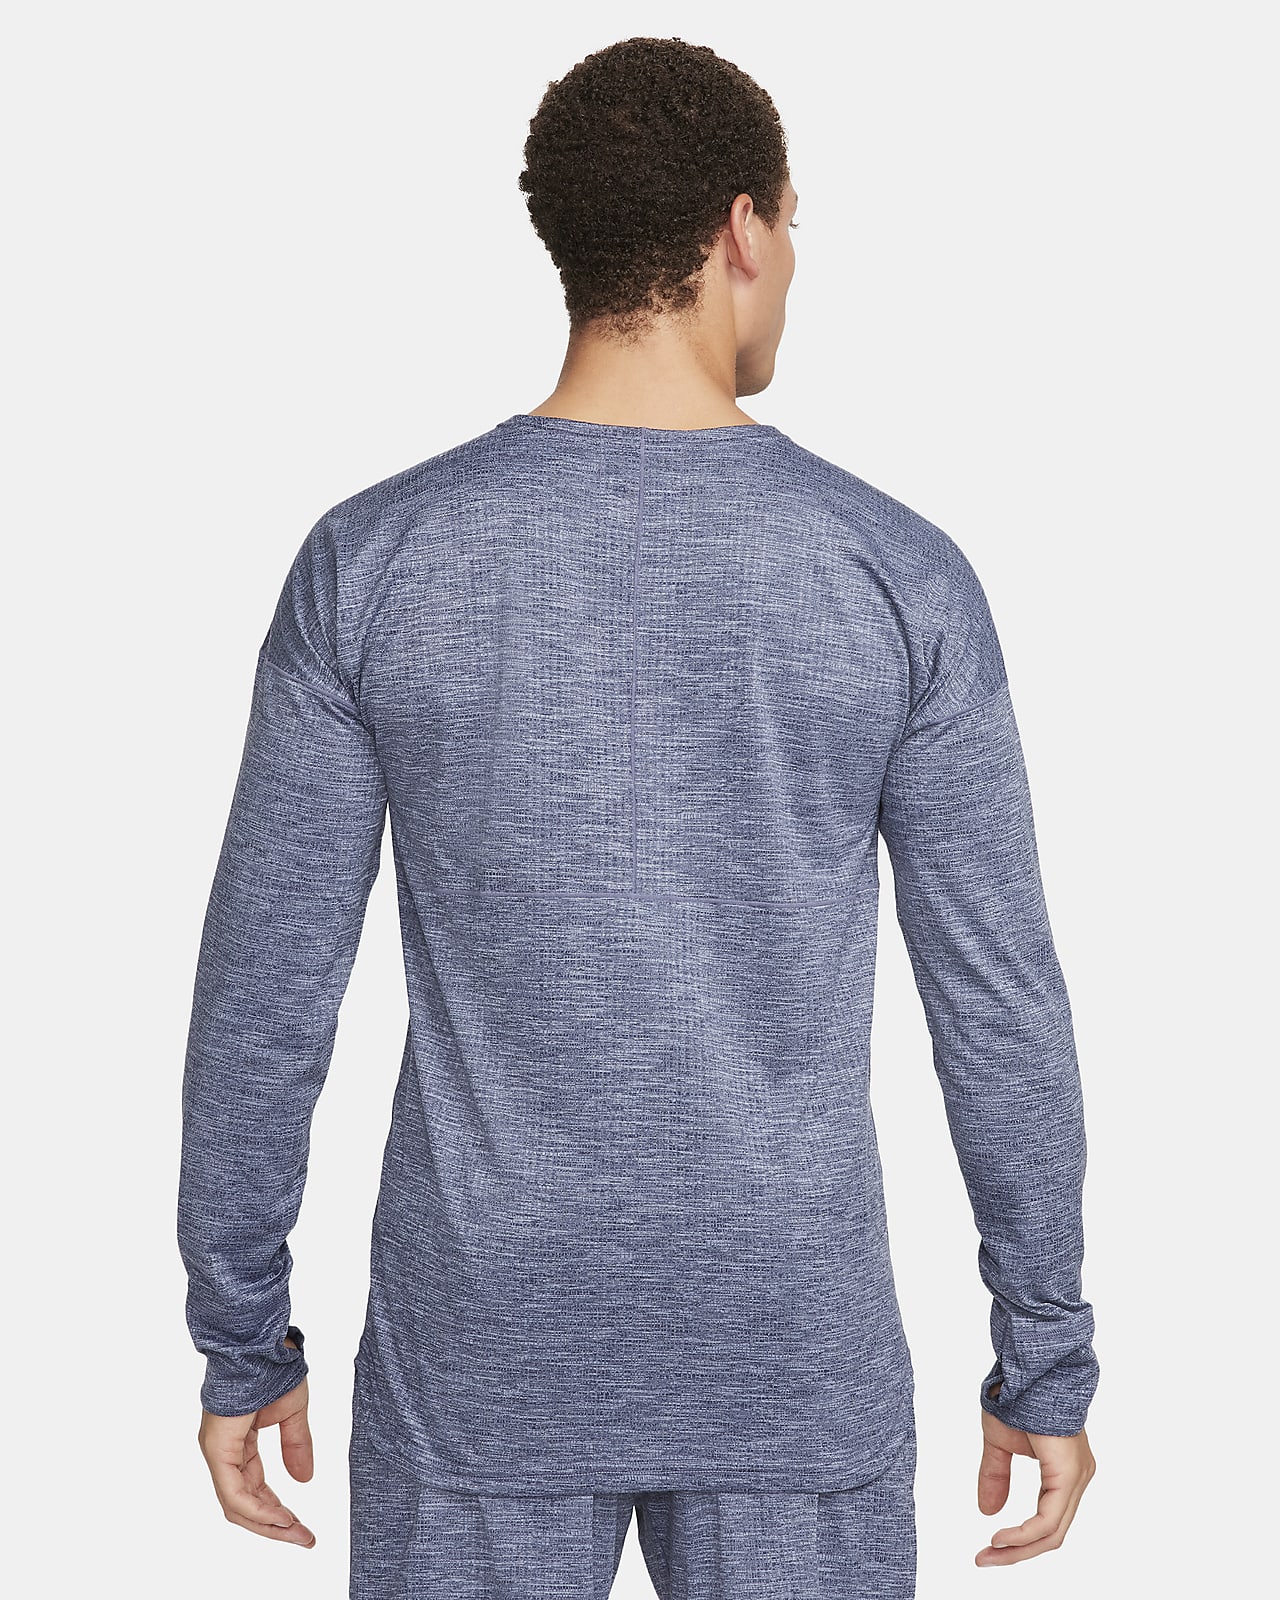 https://static.nike.com/a/images/t_PDP_1280_v1/f_auto,q_auto:eco/2855e402-4162-4f42-b162-e0771d0949ba/yoga-mens-dri-fit-crew-top-mwfmwj.png